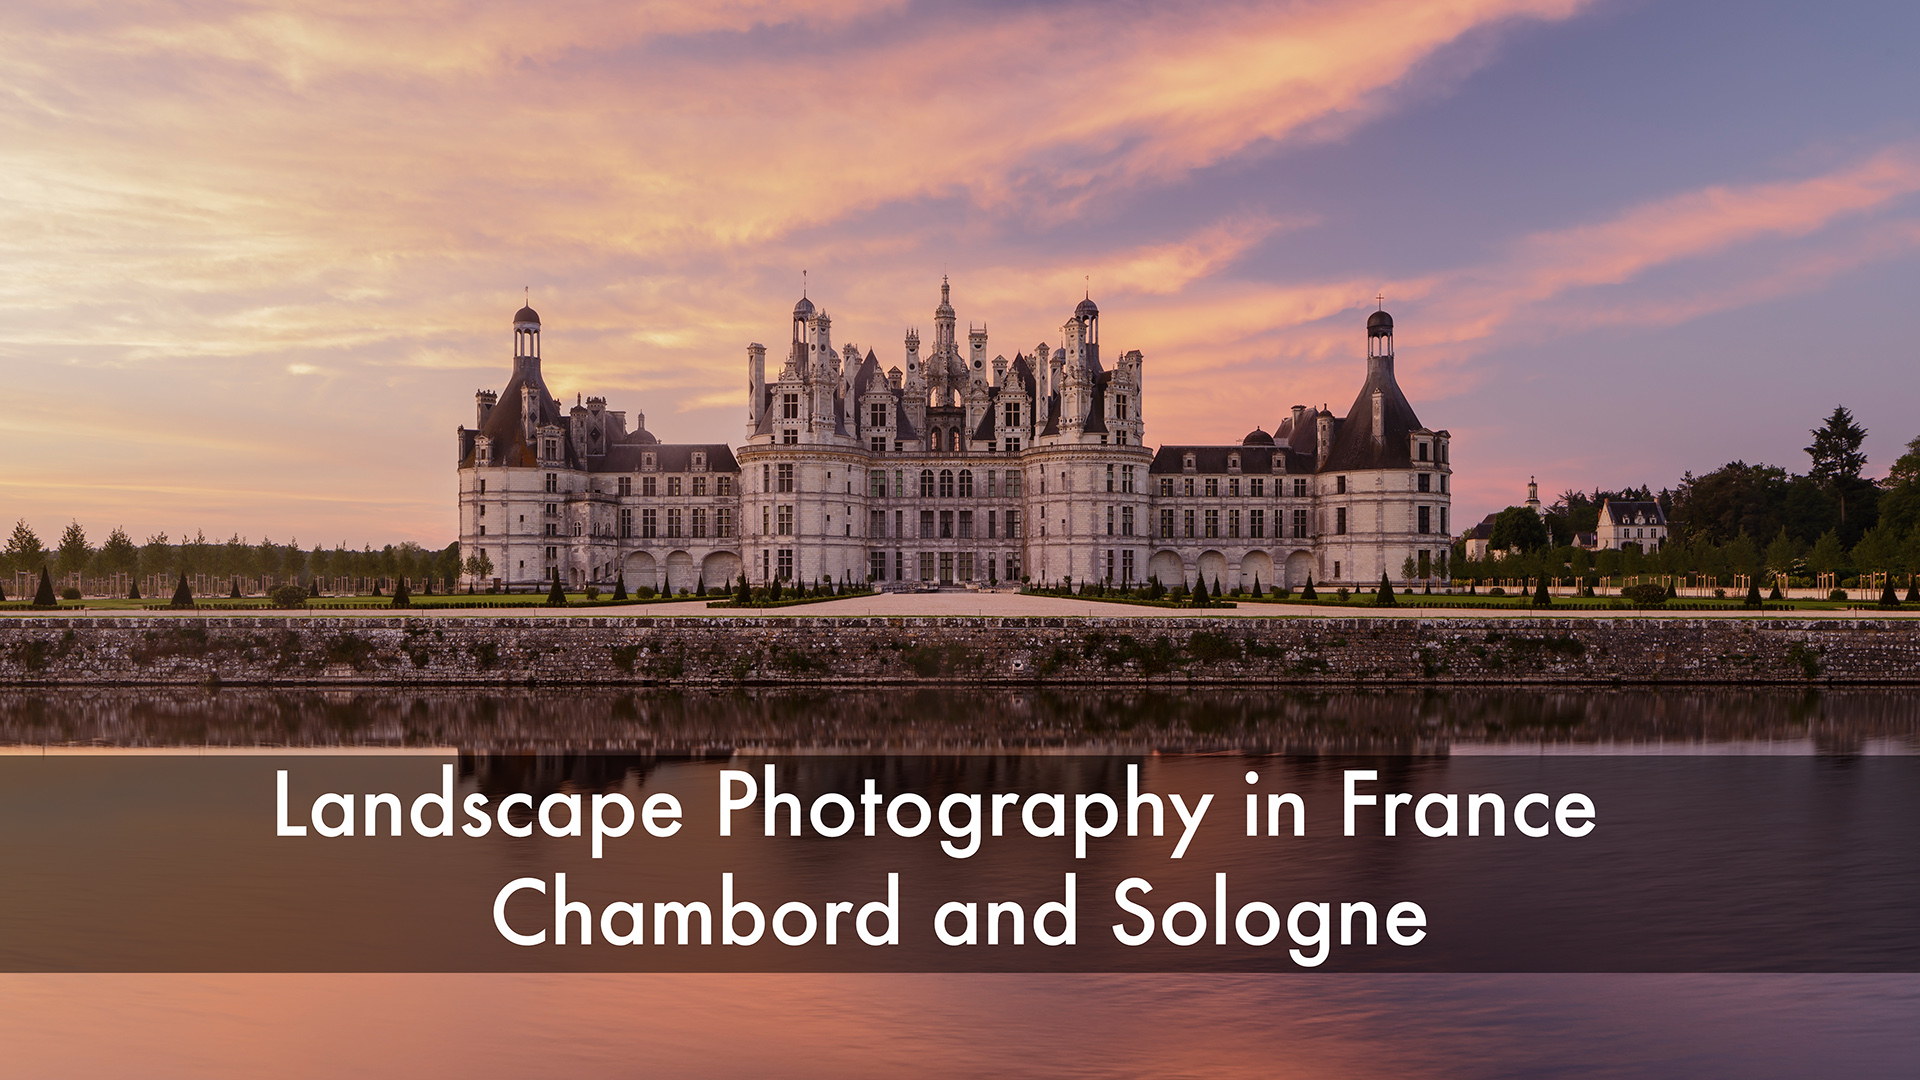 Château de Chambord and Sologne. Landscape photography in France.